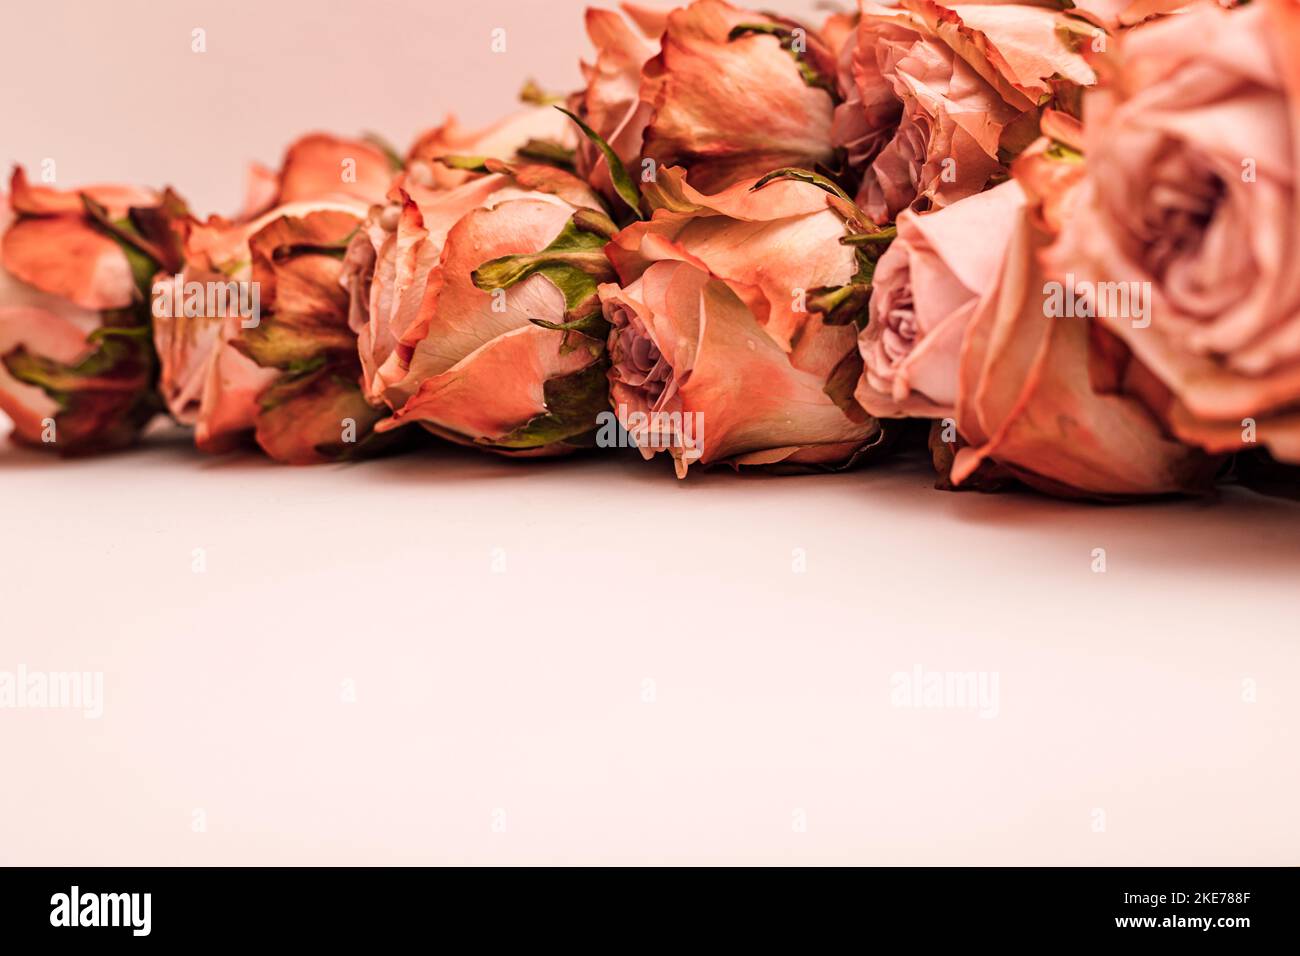 Orange roses are laid out on a monochromatic background.  Stock Photo